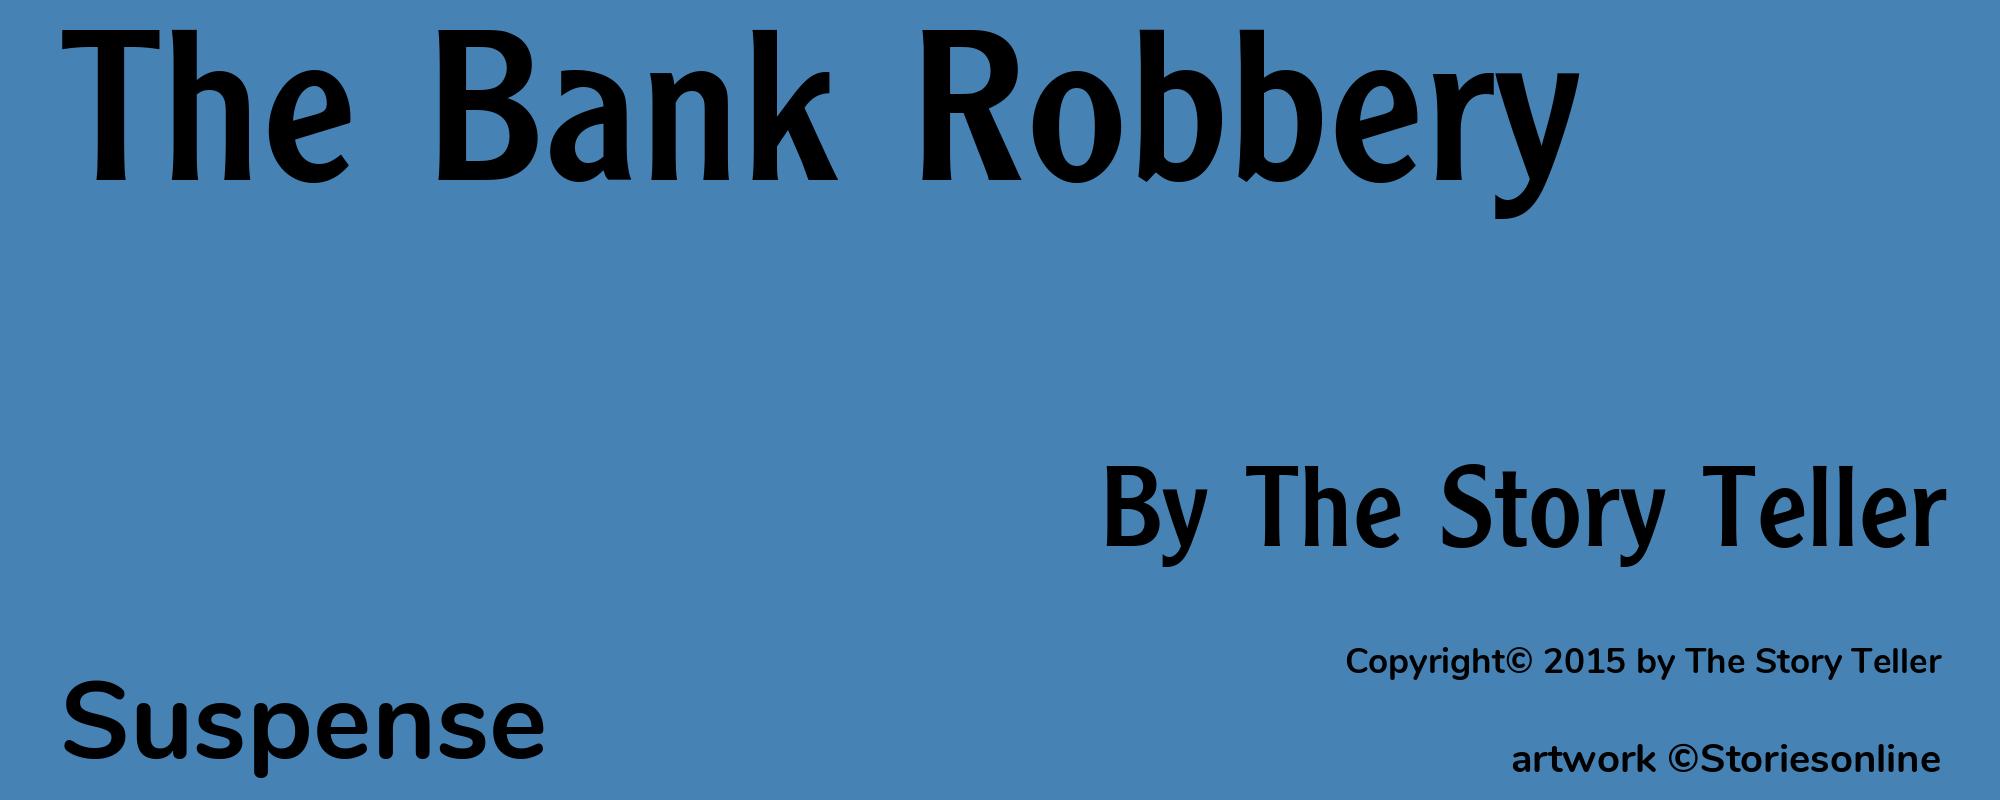 The Bank Robbery - Cover